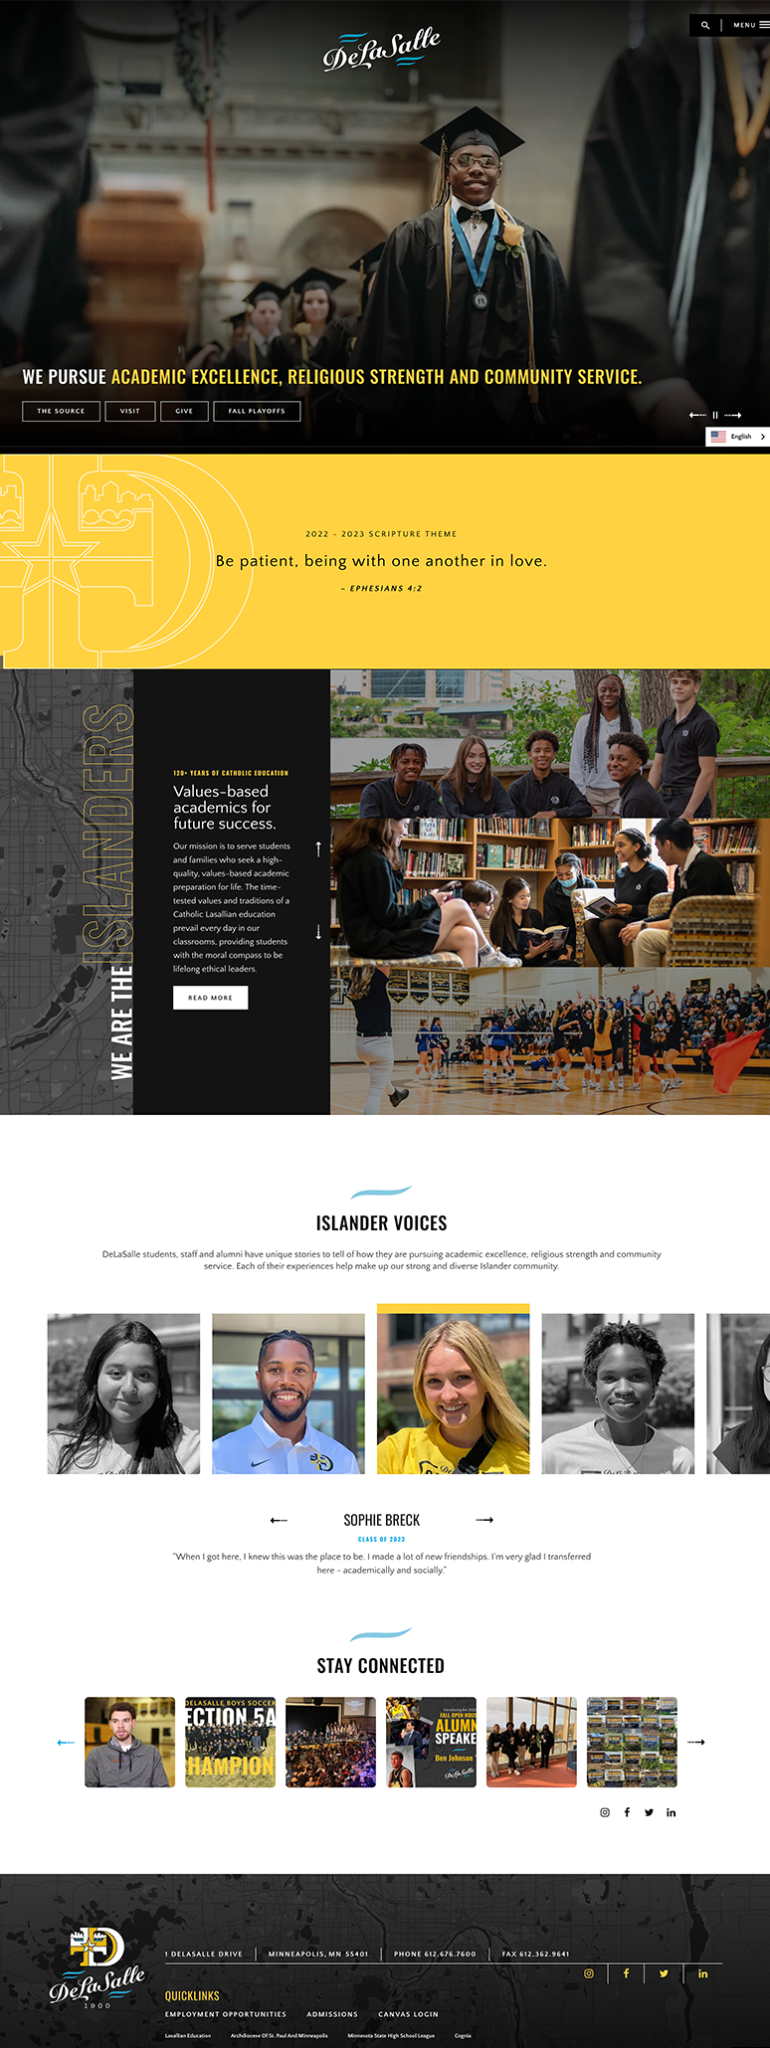 Homepage redesign of K12 district website